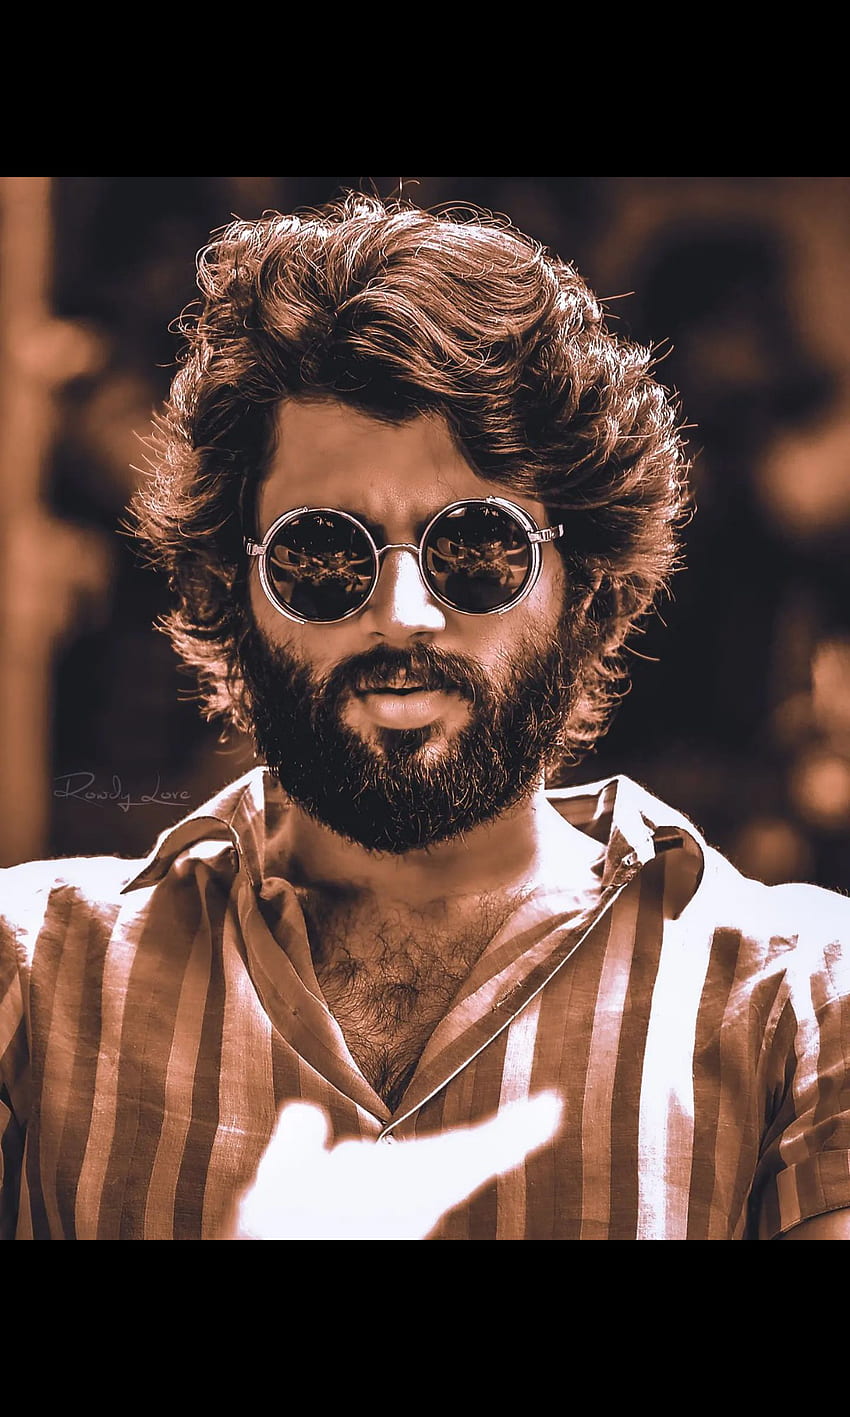 Ultimate Compilation of Arjun Reddy HD Images – Over 999 Stunning Photos in 4K